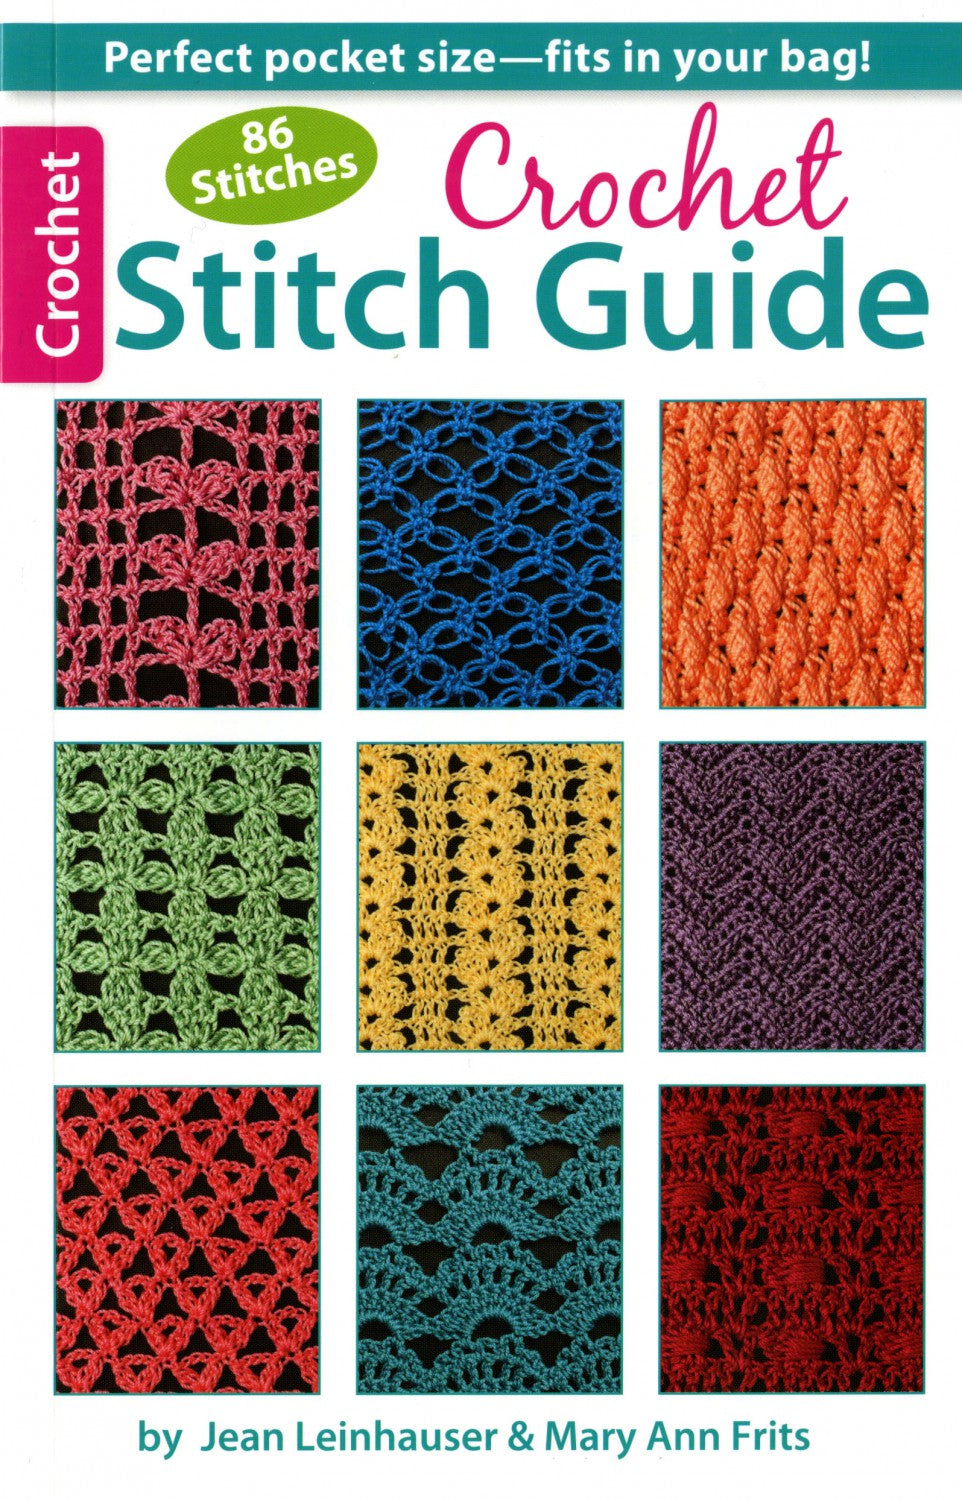 86 Stitches Crochet Stitch Guide book by Rita Weiss and Jean Leinhauser (577733984301)